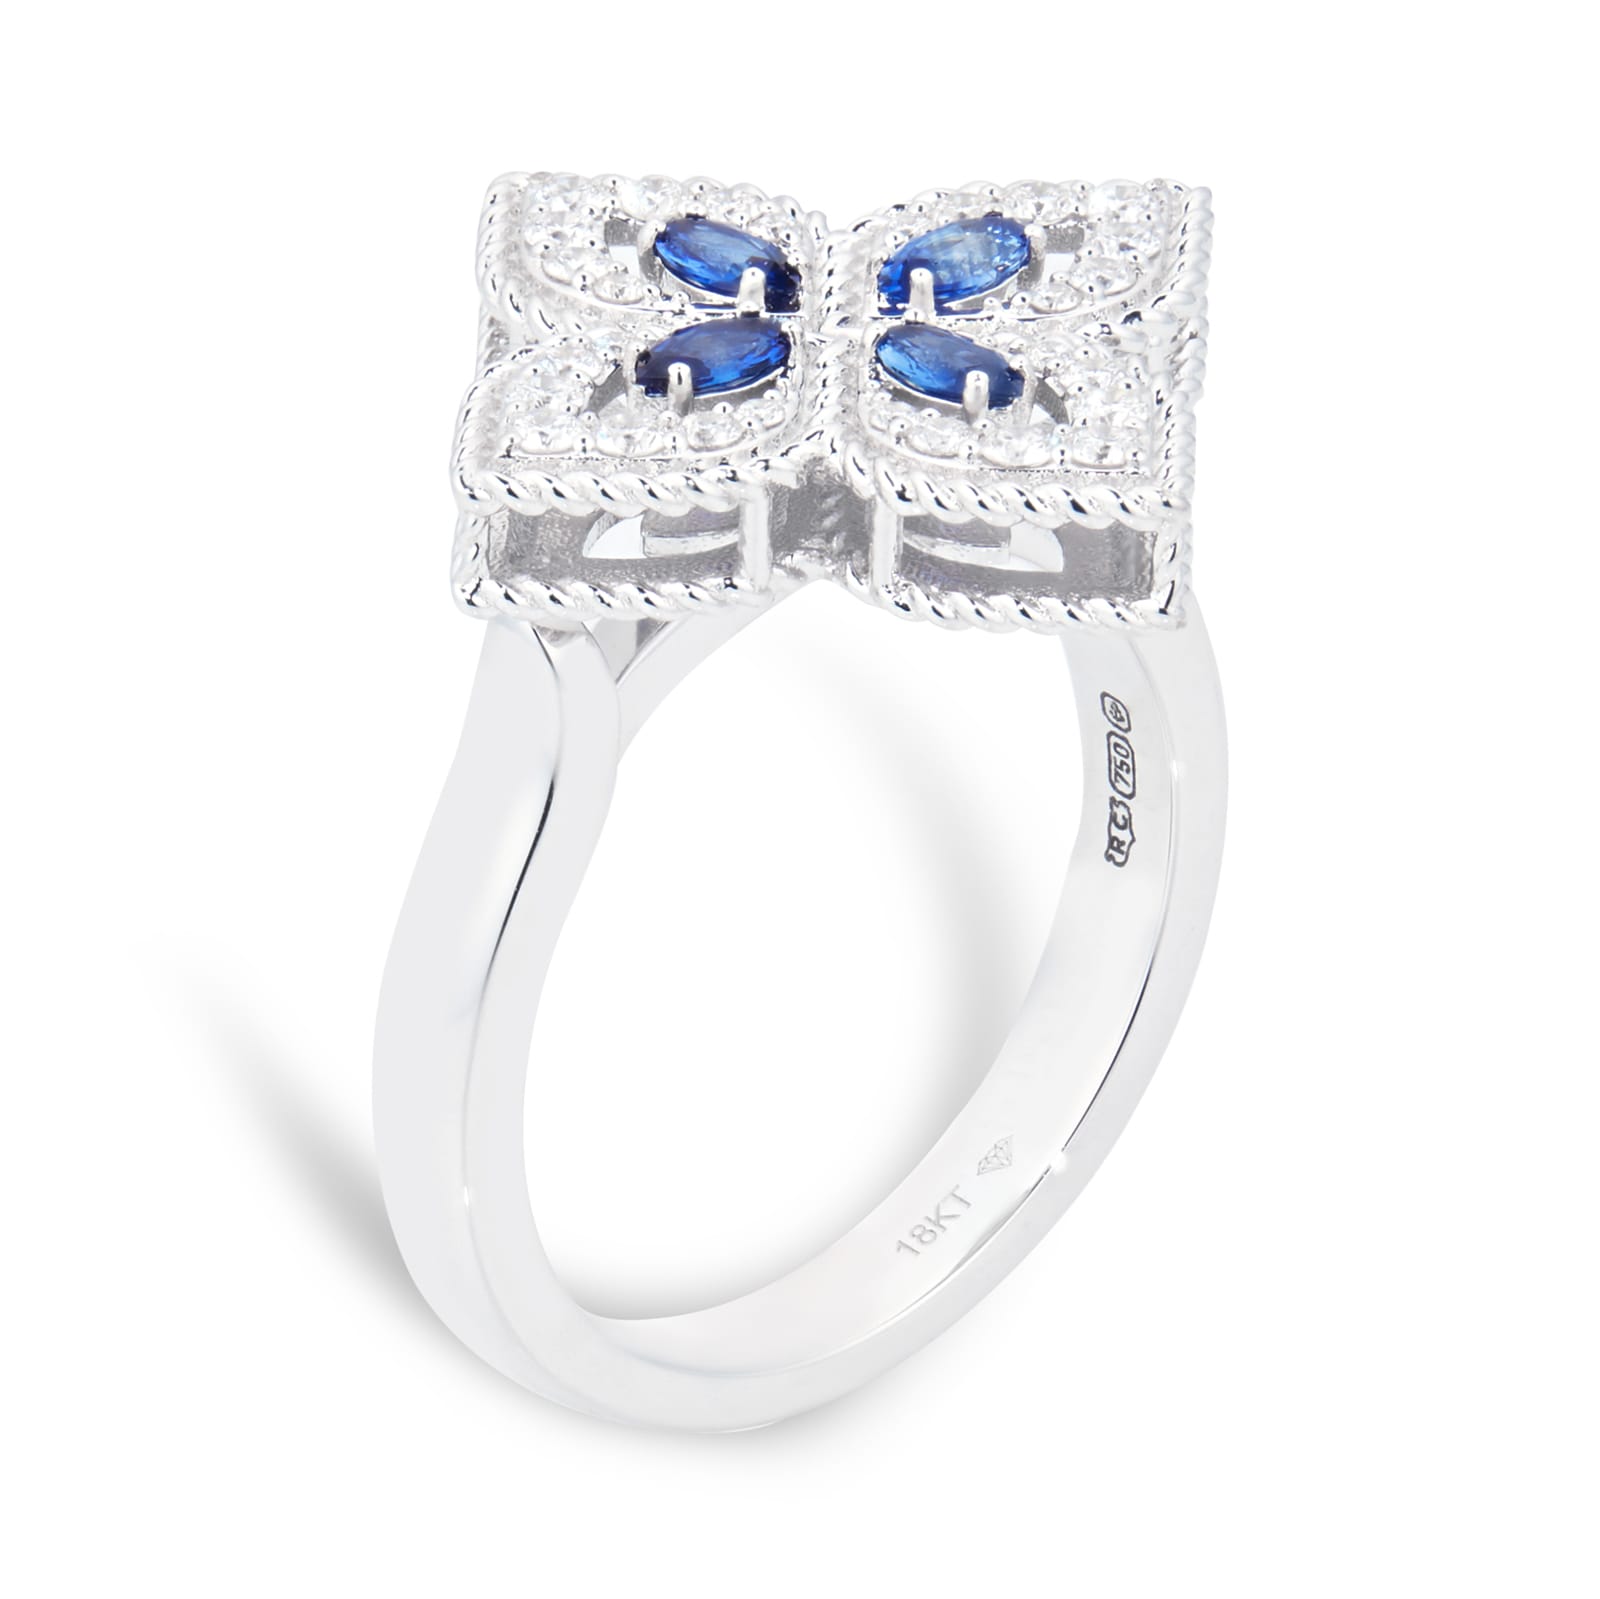 Exclusive 18ct White Gold Princess Flower 0.26ct Diamond & Sapphire Ring - Ring Size L